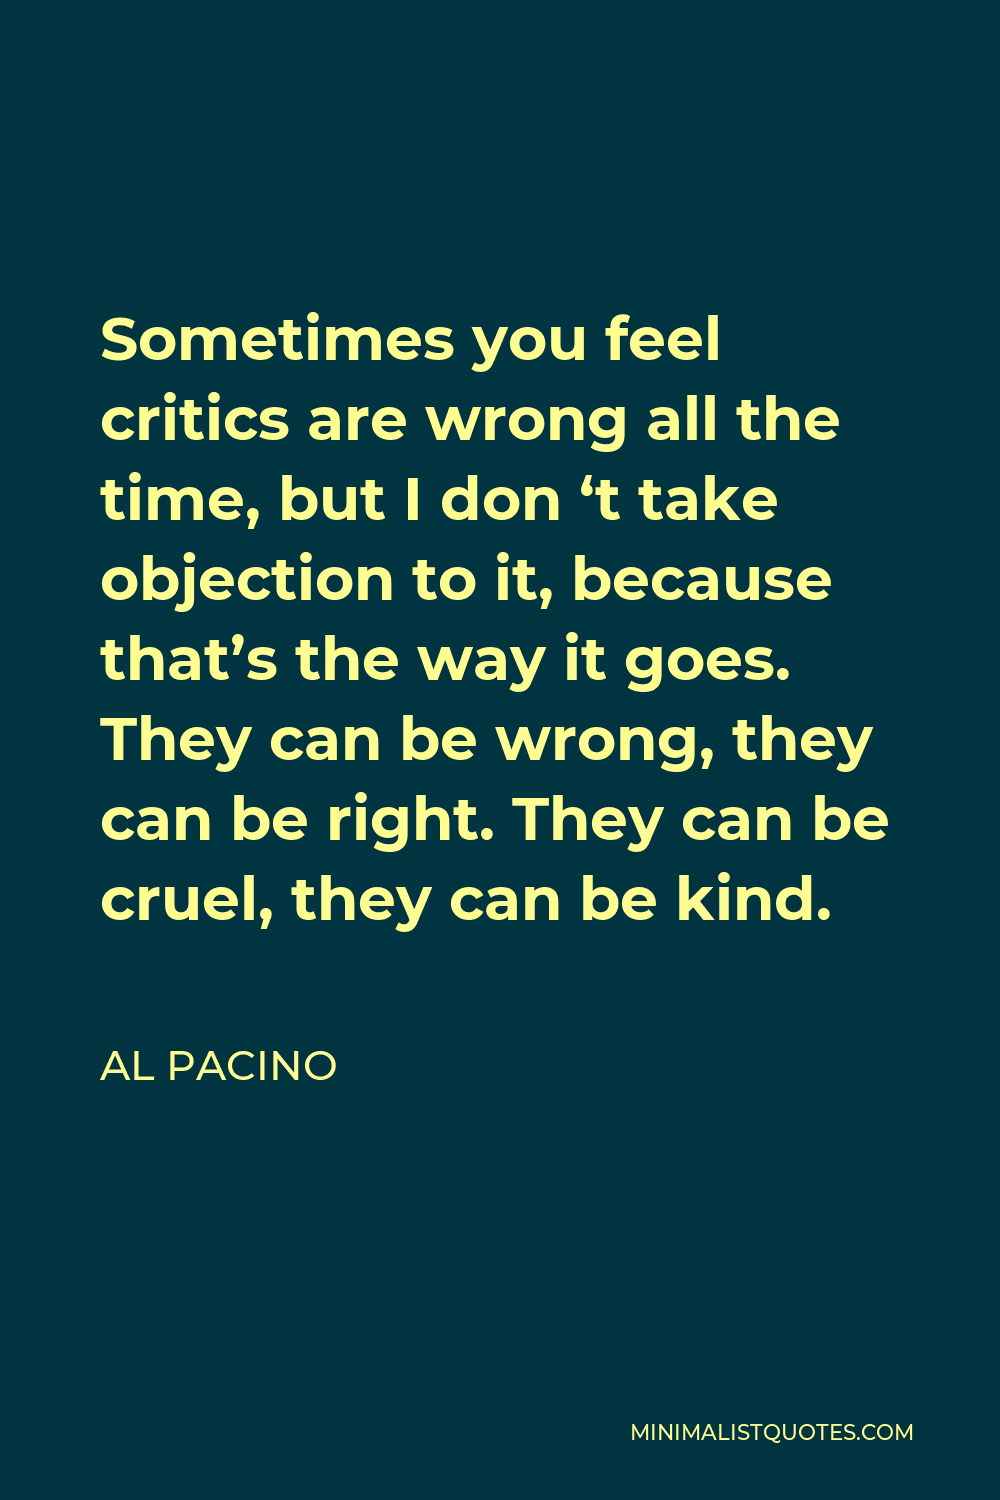 Al Pacino Quote - Sometimes you feel critics are wrong all the time, but I don ‘t take objection to it, because that’s the way it goes. They can be wrong, they can be right. They can be cruel, they can be kind.